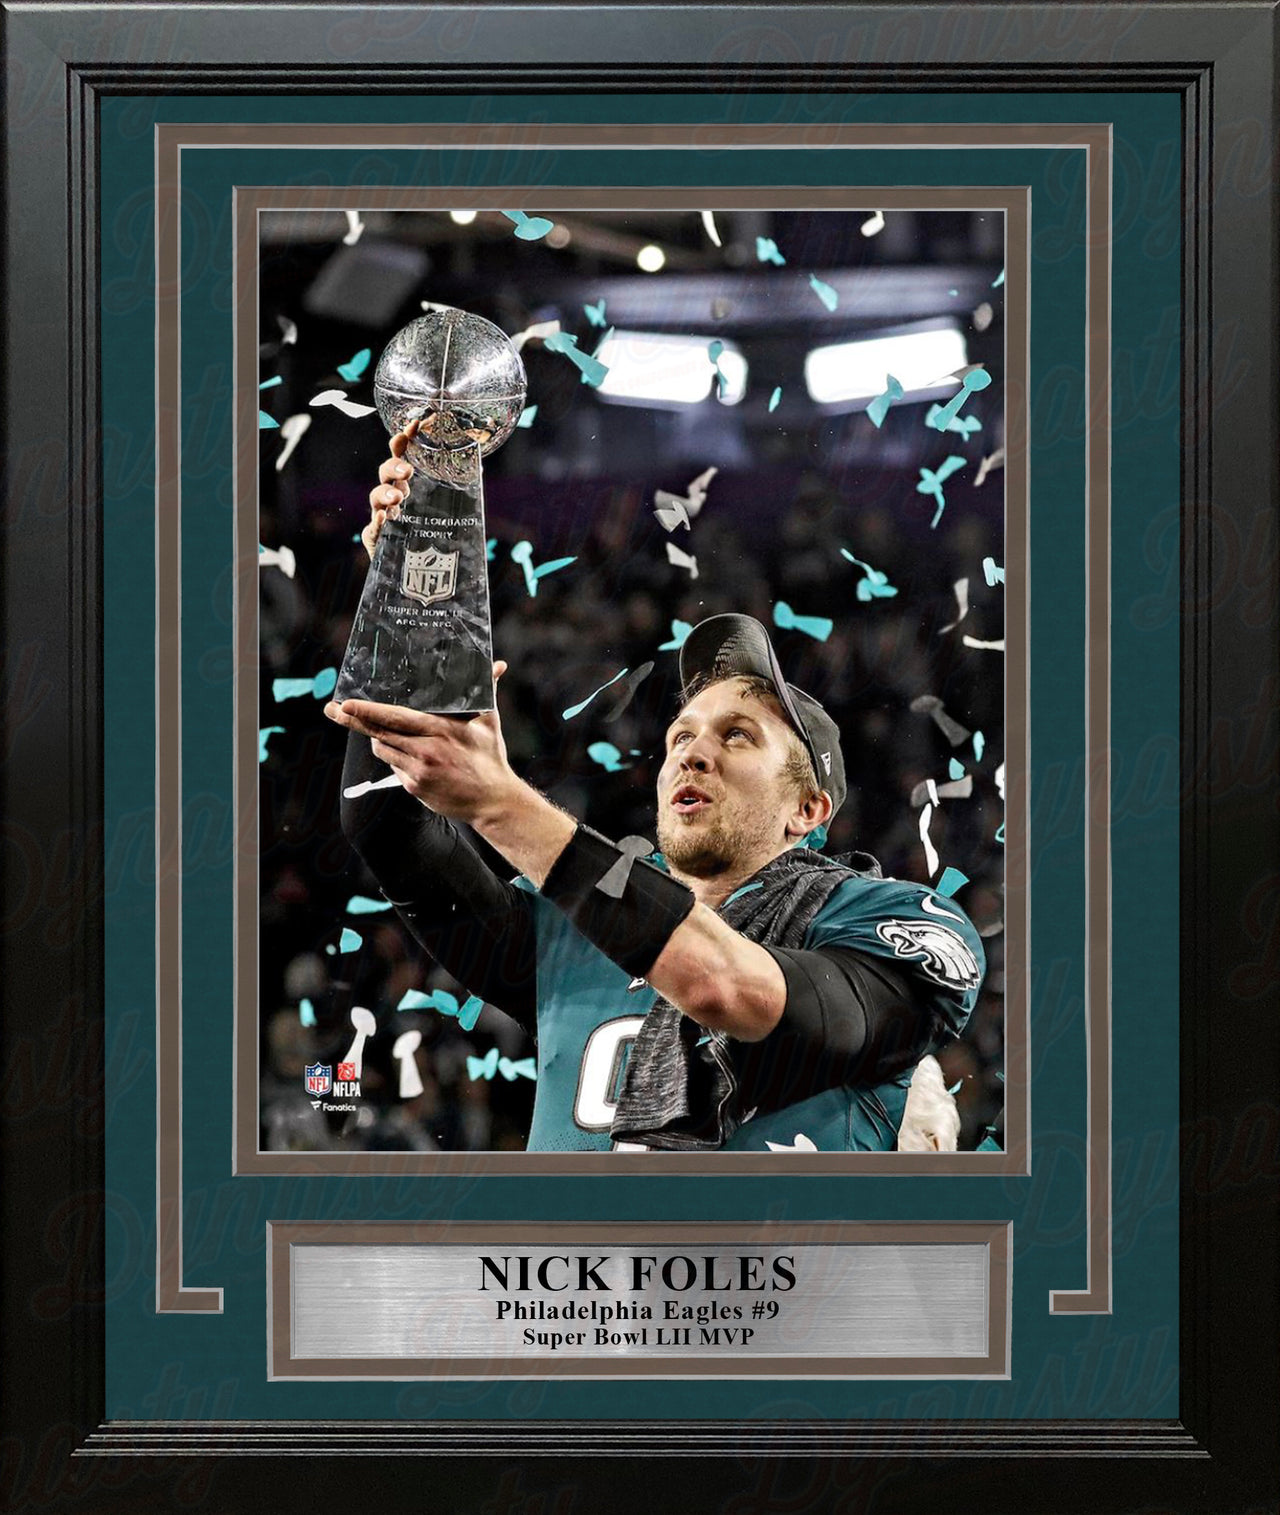 Foles Speed Ahead Philadelphia Eagles - Sports Reprint – The Inquirer Store